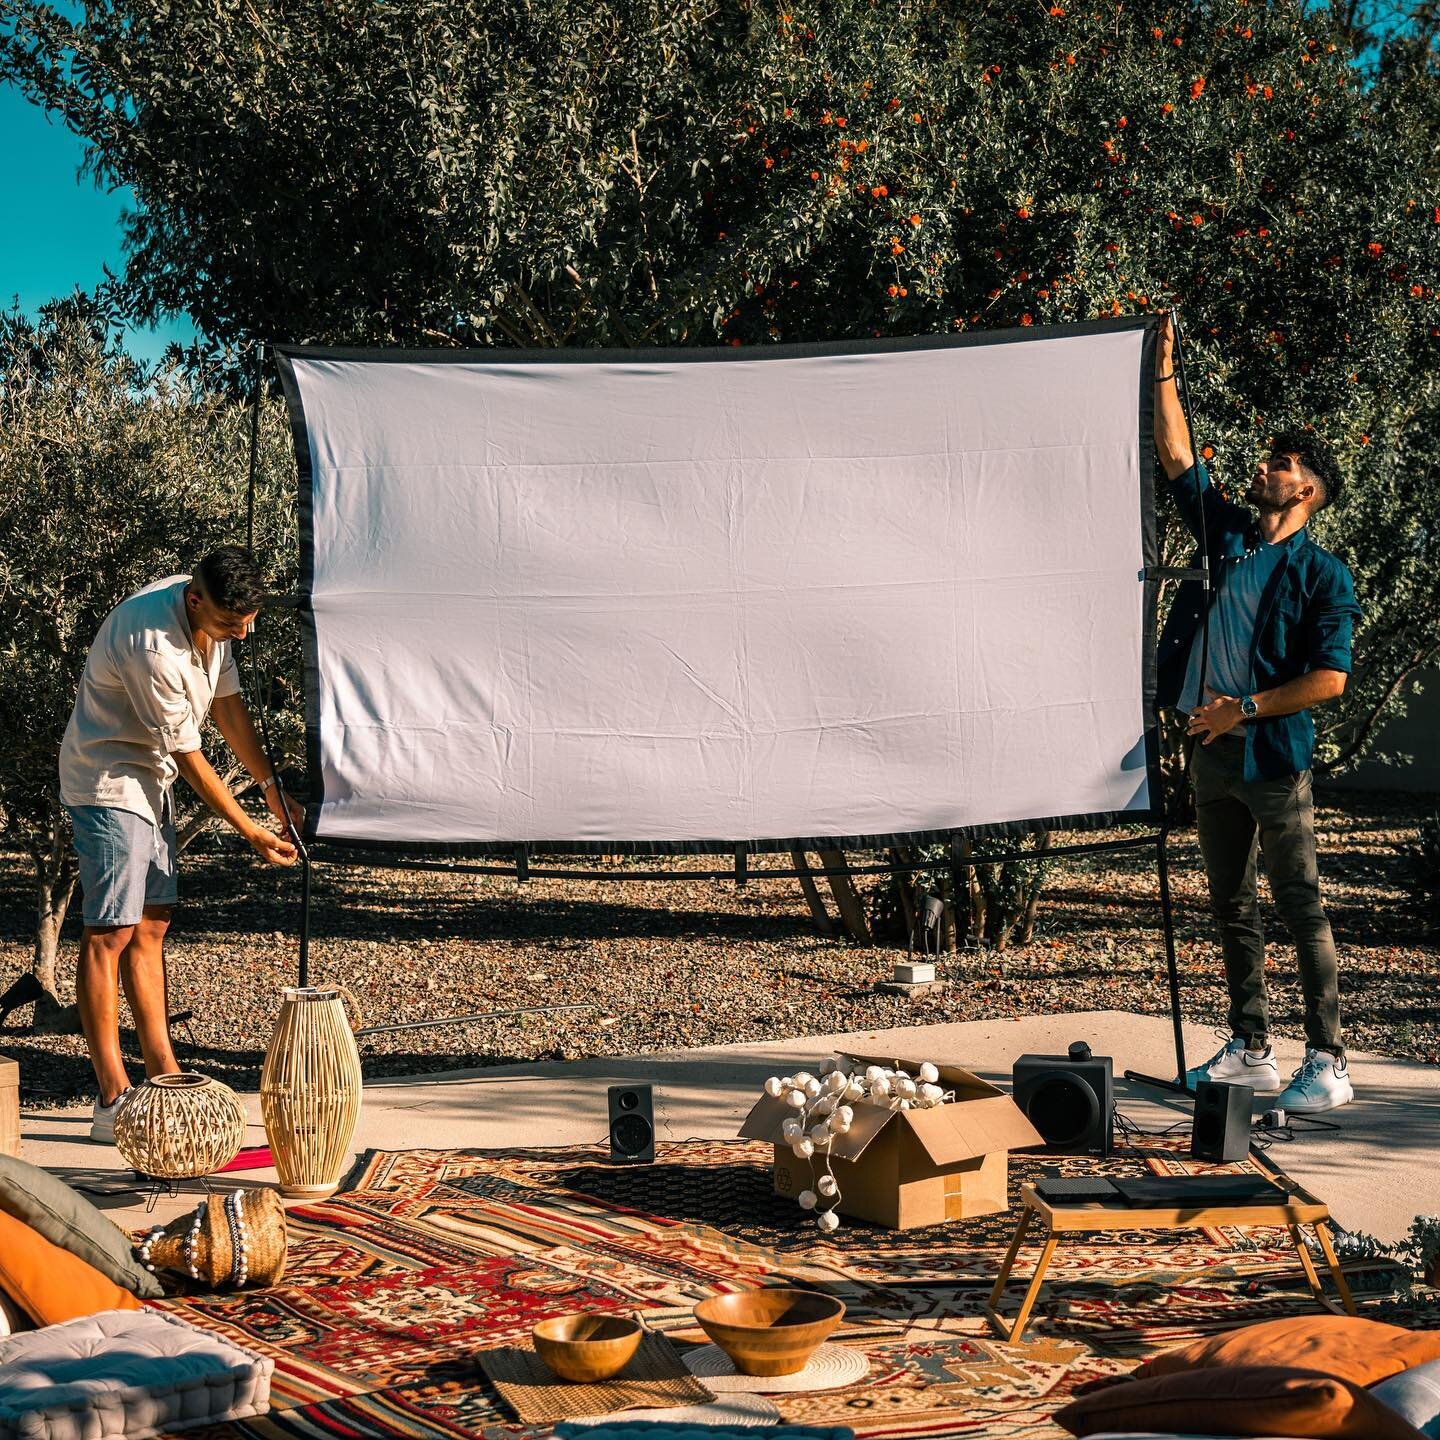 A white screen&hellip; or limitless possibilities? 🏳

Kickstart your week with a blank canvas and project your full potential 📽 🙌

Whether it&rsquo;s a 200-inch portable, a small flat-screen TV or a simple white wall, Hosts on #cinebur know how to